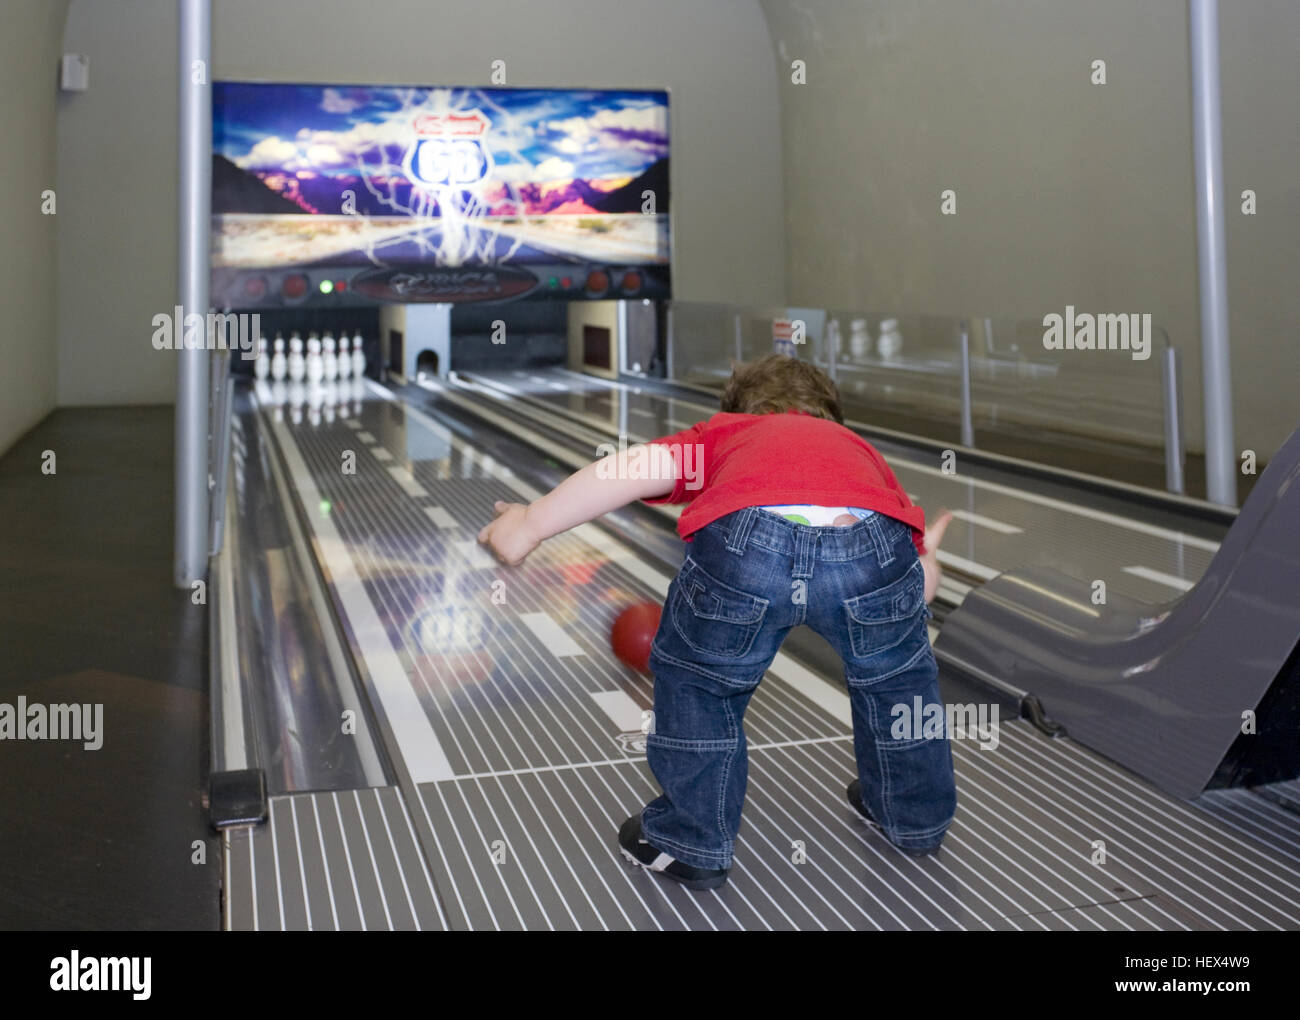 Small child pitches bowling ball down bowling alley, Stock Photo